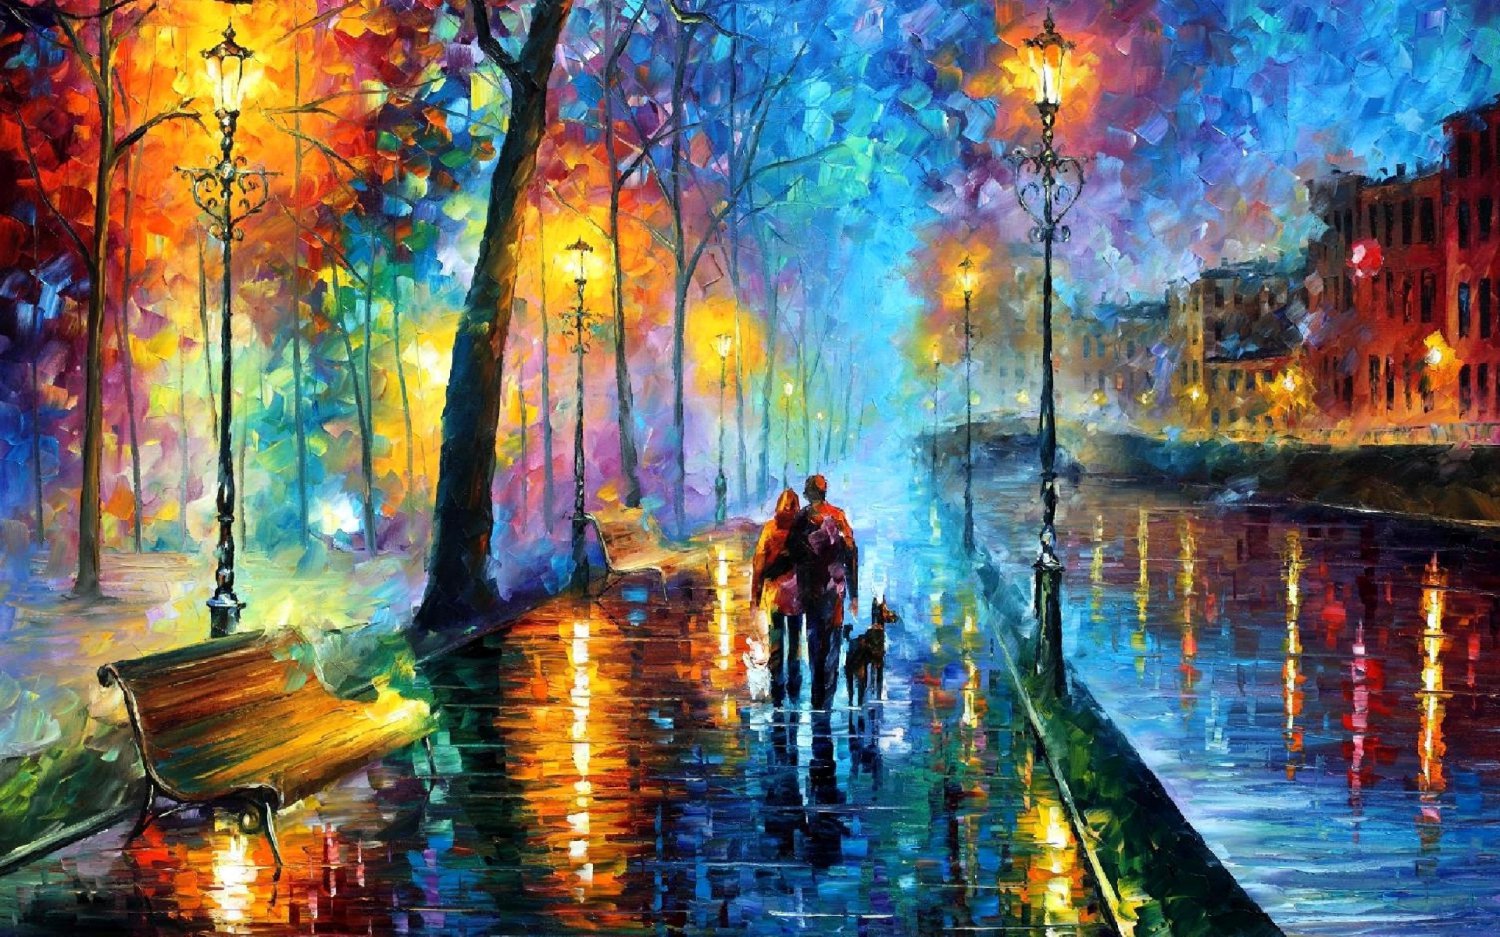 Melody of the Night - Leonid Afremov Poster 13x19 inches